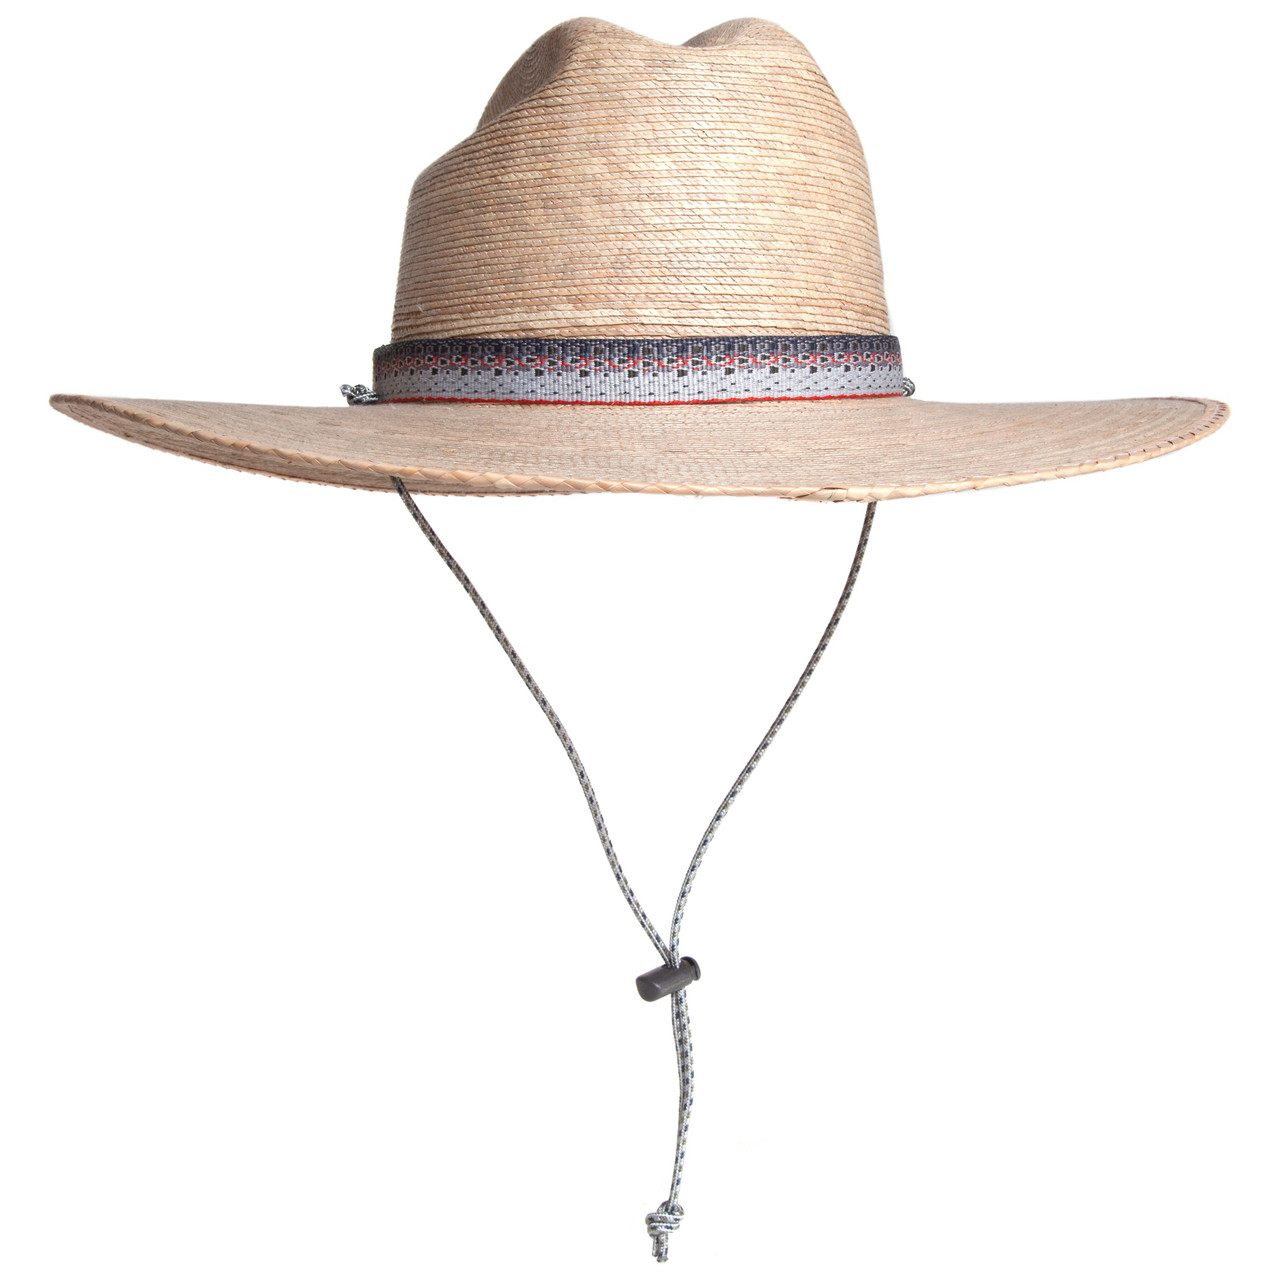 fishpond Lowcountry Hat - Tan - L